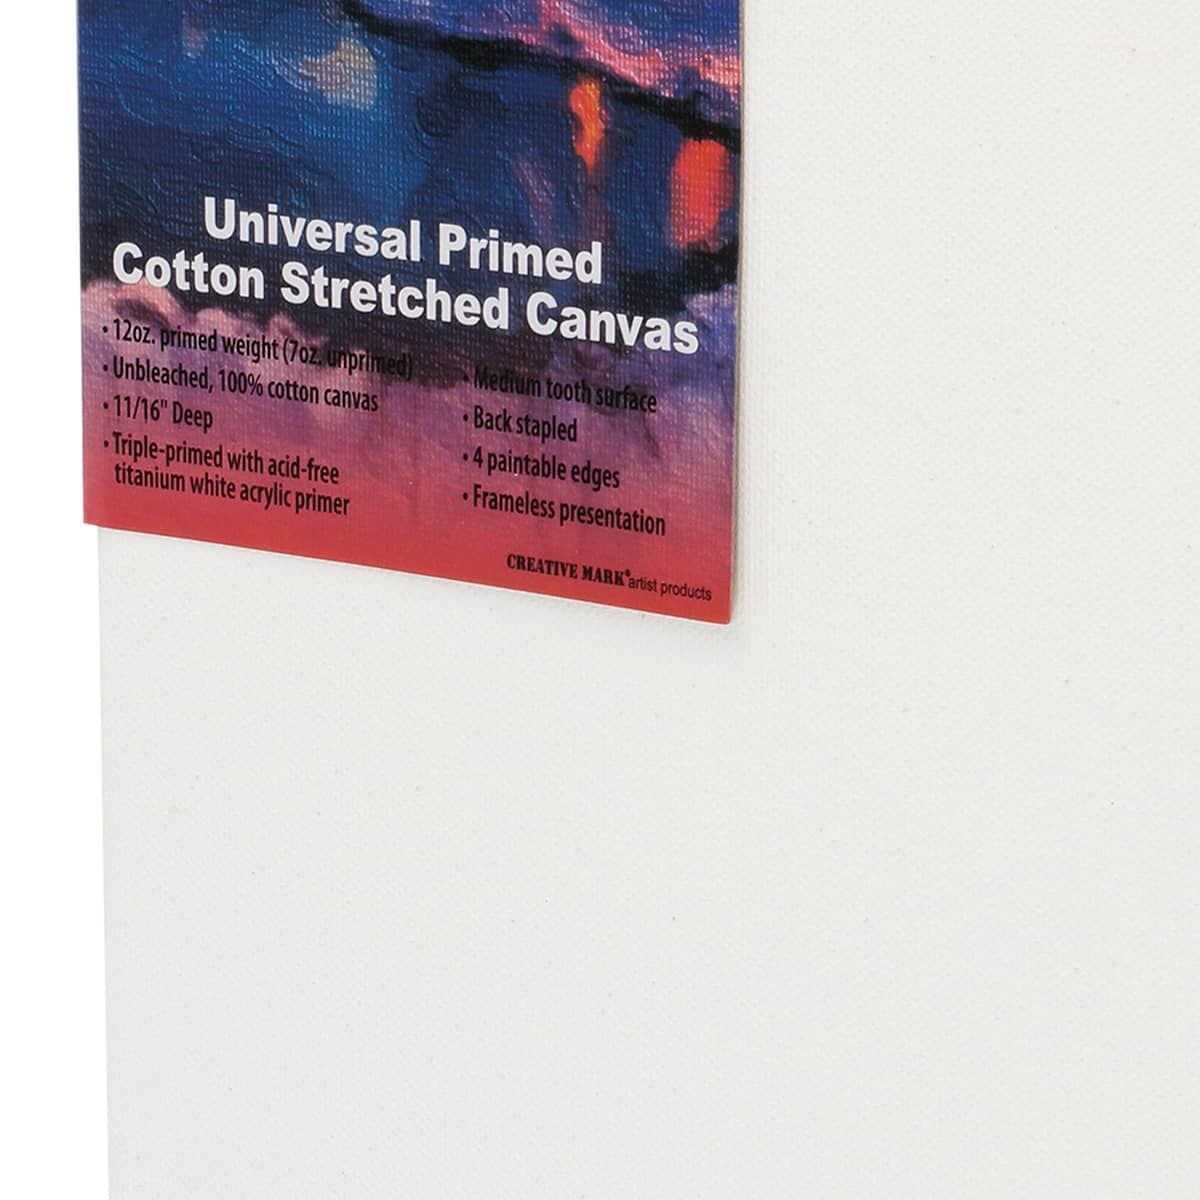 Universal Primed Cotton Stretched Canvas